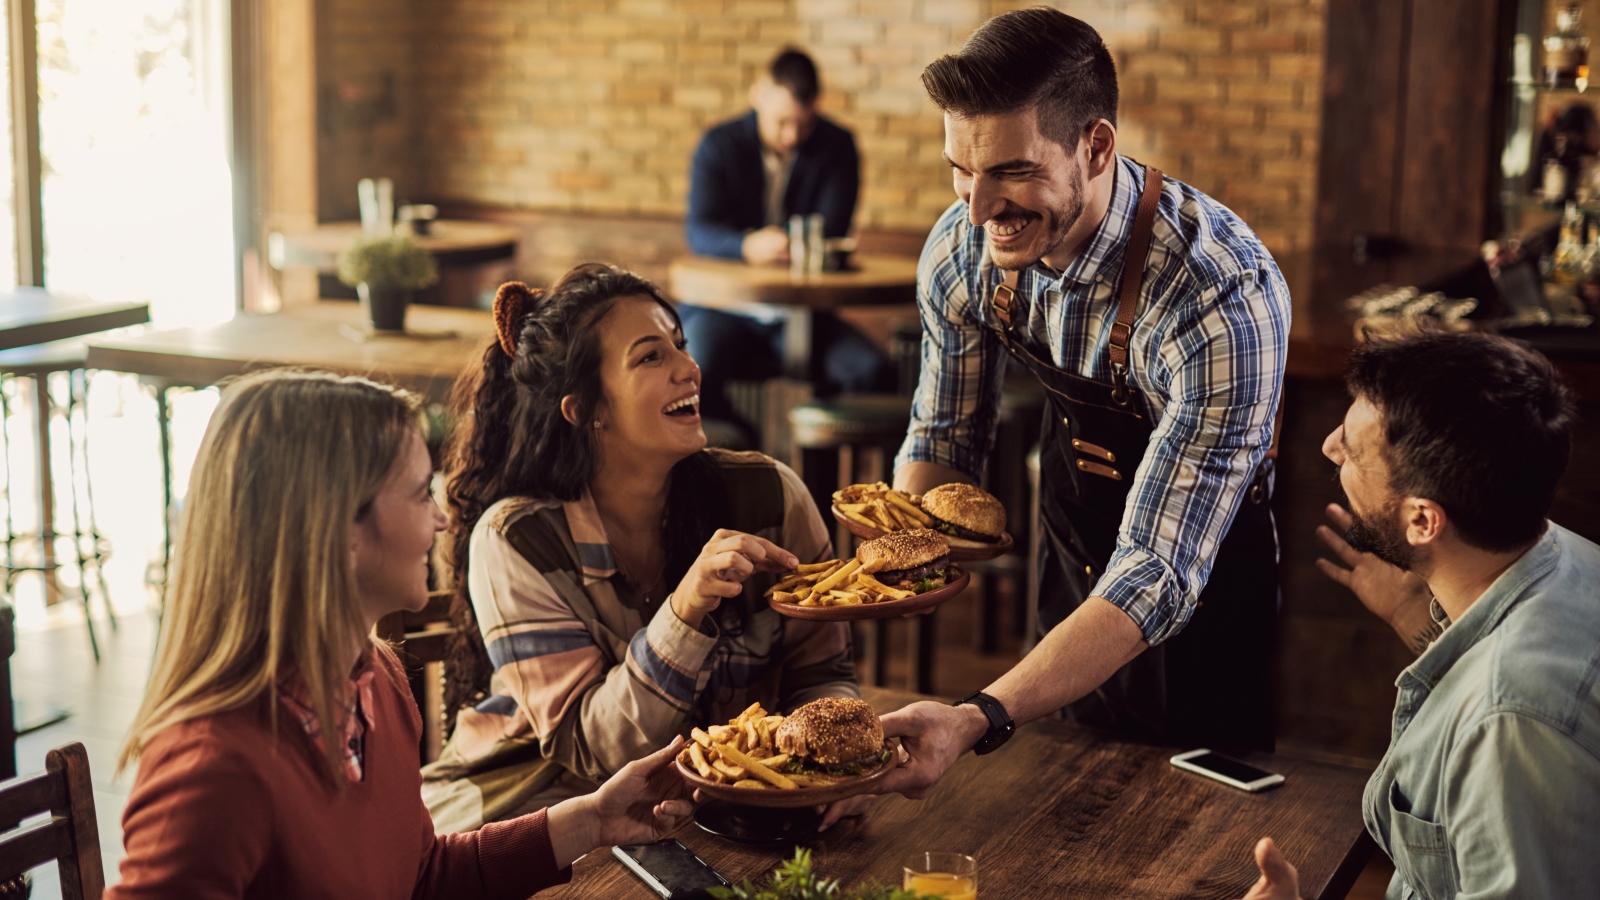 <p><span>Donning a sports jersey or a charm-laden bracelet might be a style choice for some, but for waiters, it does a lot more than that. It offers glimpses into your personal interests and passions. Observant waiters might use these insights to spark up a light conversation, making your dining experience even better.</span></p>